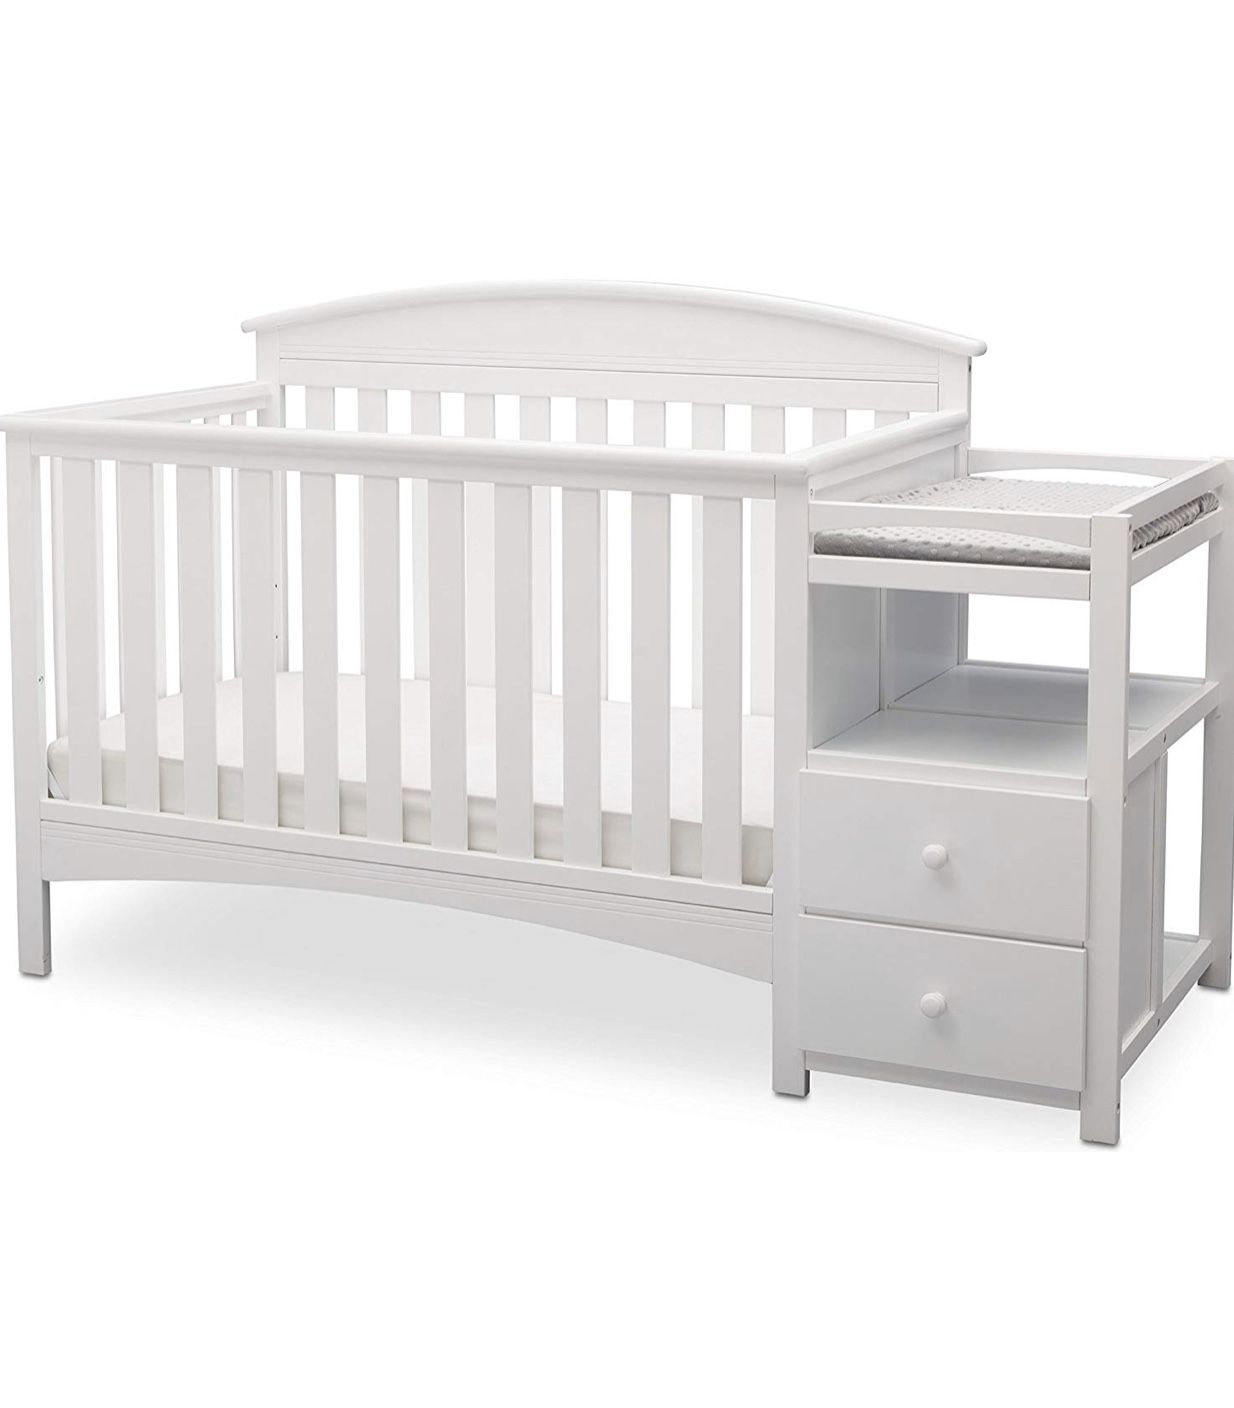 White wooden crib with changing table attached